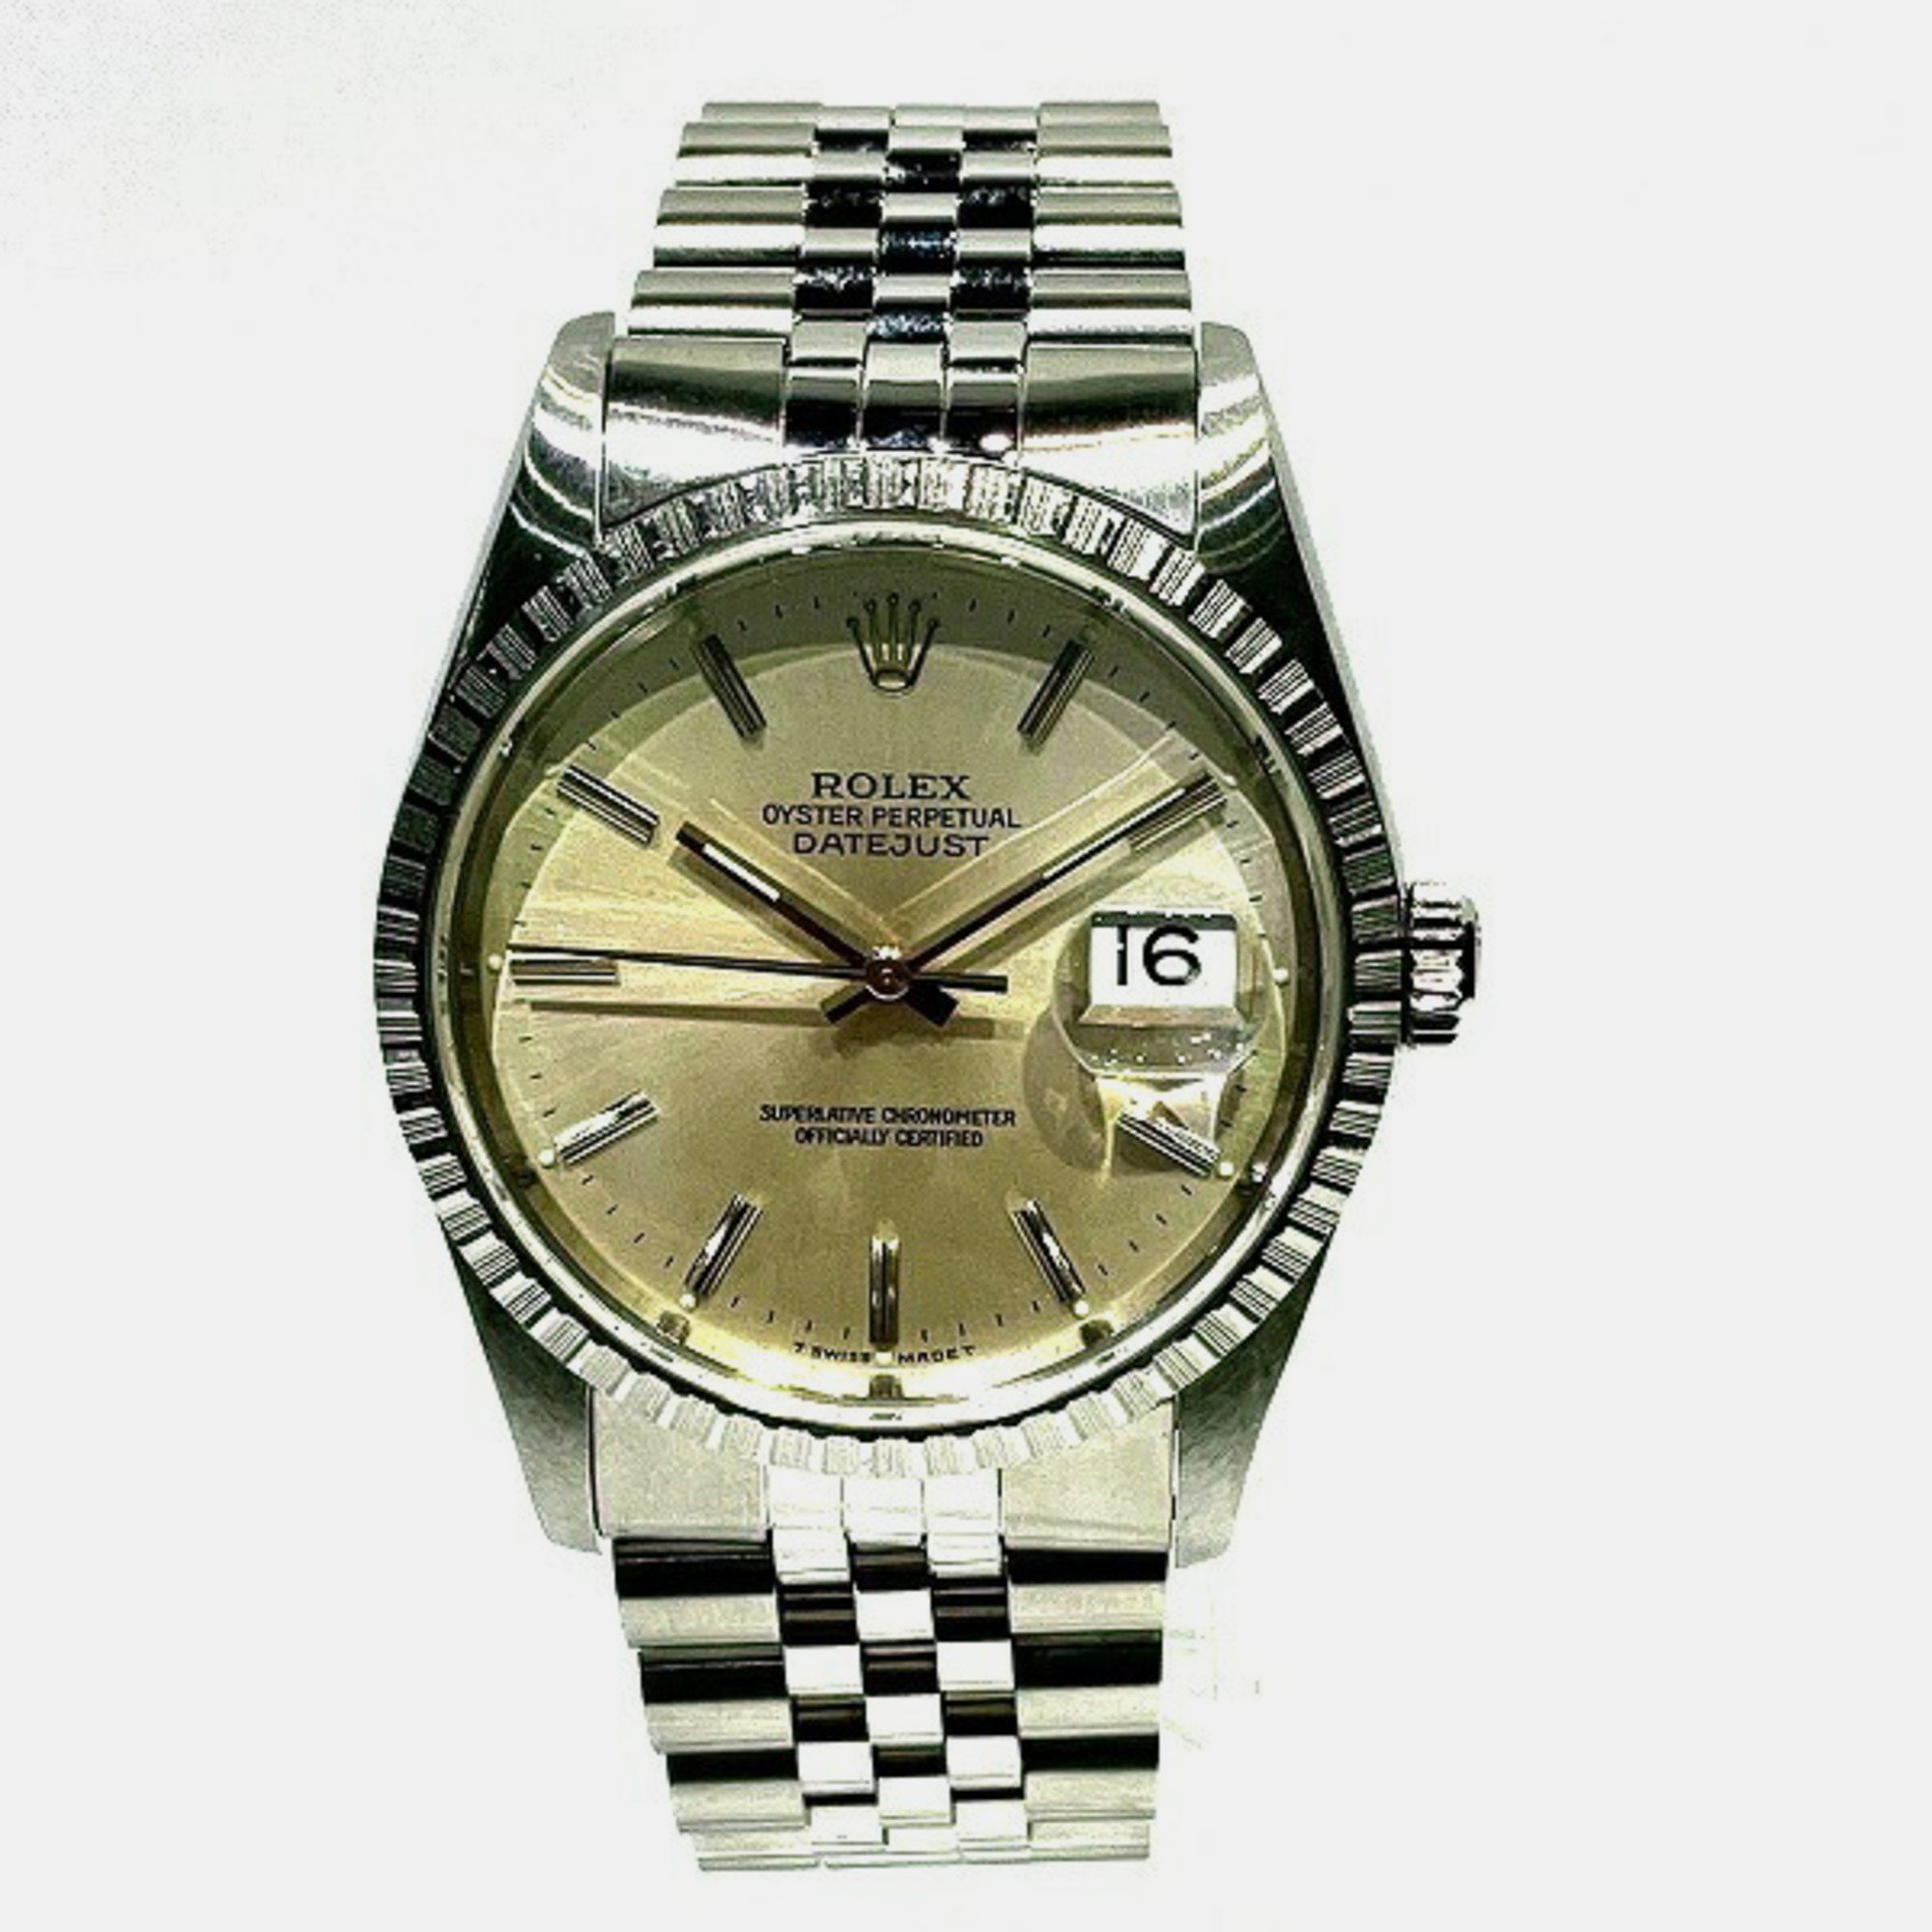 

Rolex Silver Stainless Steel Datejust 16220 Automatic Men's Wristwatch